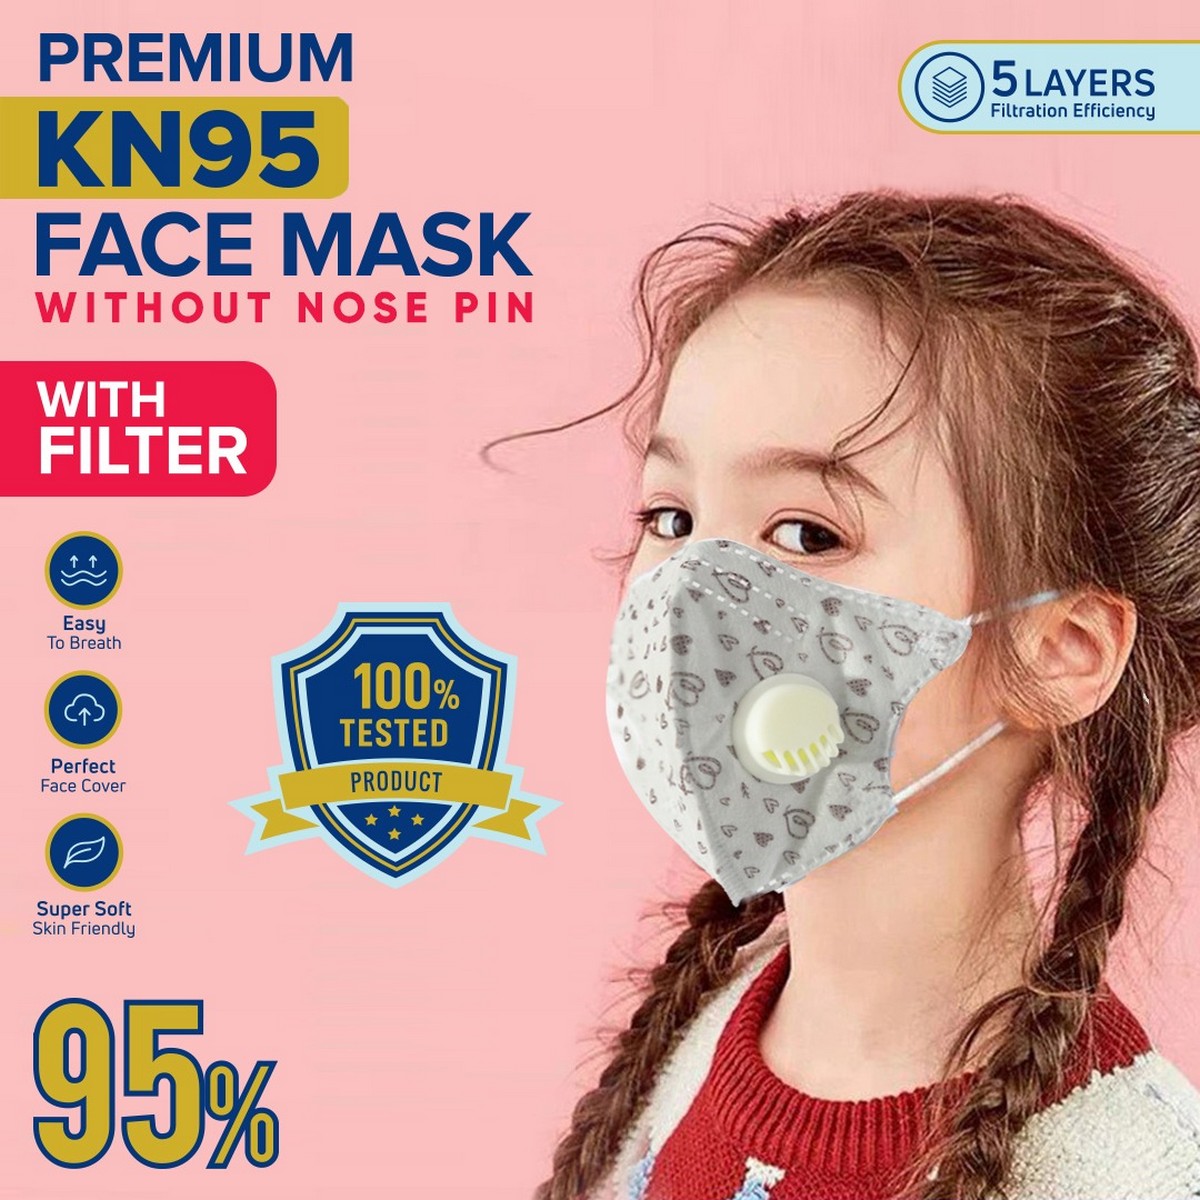 Kn95 Kids Mask With Filter | Mask For Kids Kn 95 5 Layers Face Mask With Melt Blown Layer | Reusable Face Mask N95 Mask (standard) | Kids Face Mask L Light Grey Color L Kids Fashion Mask